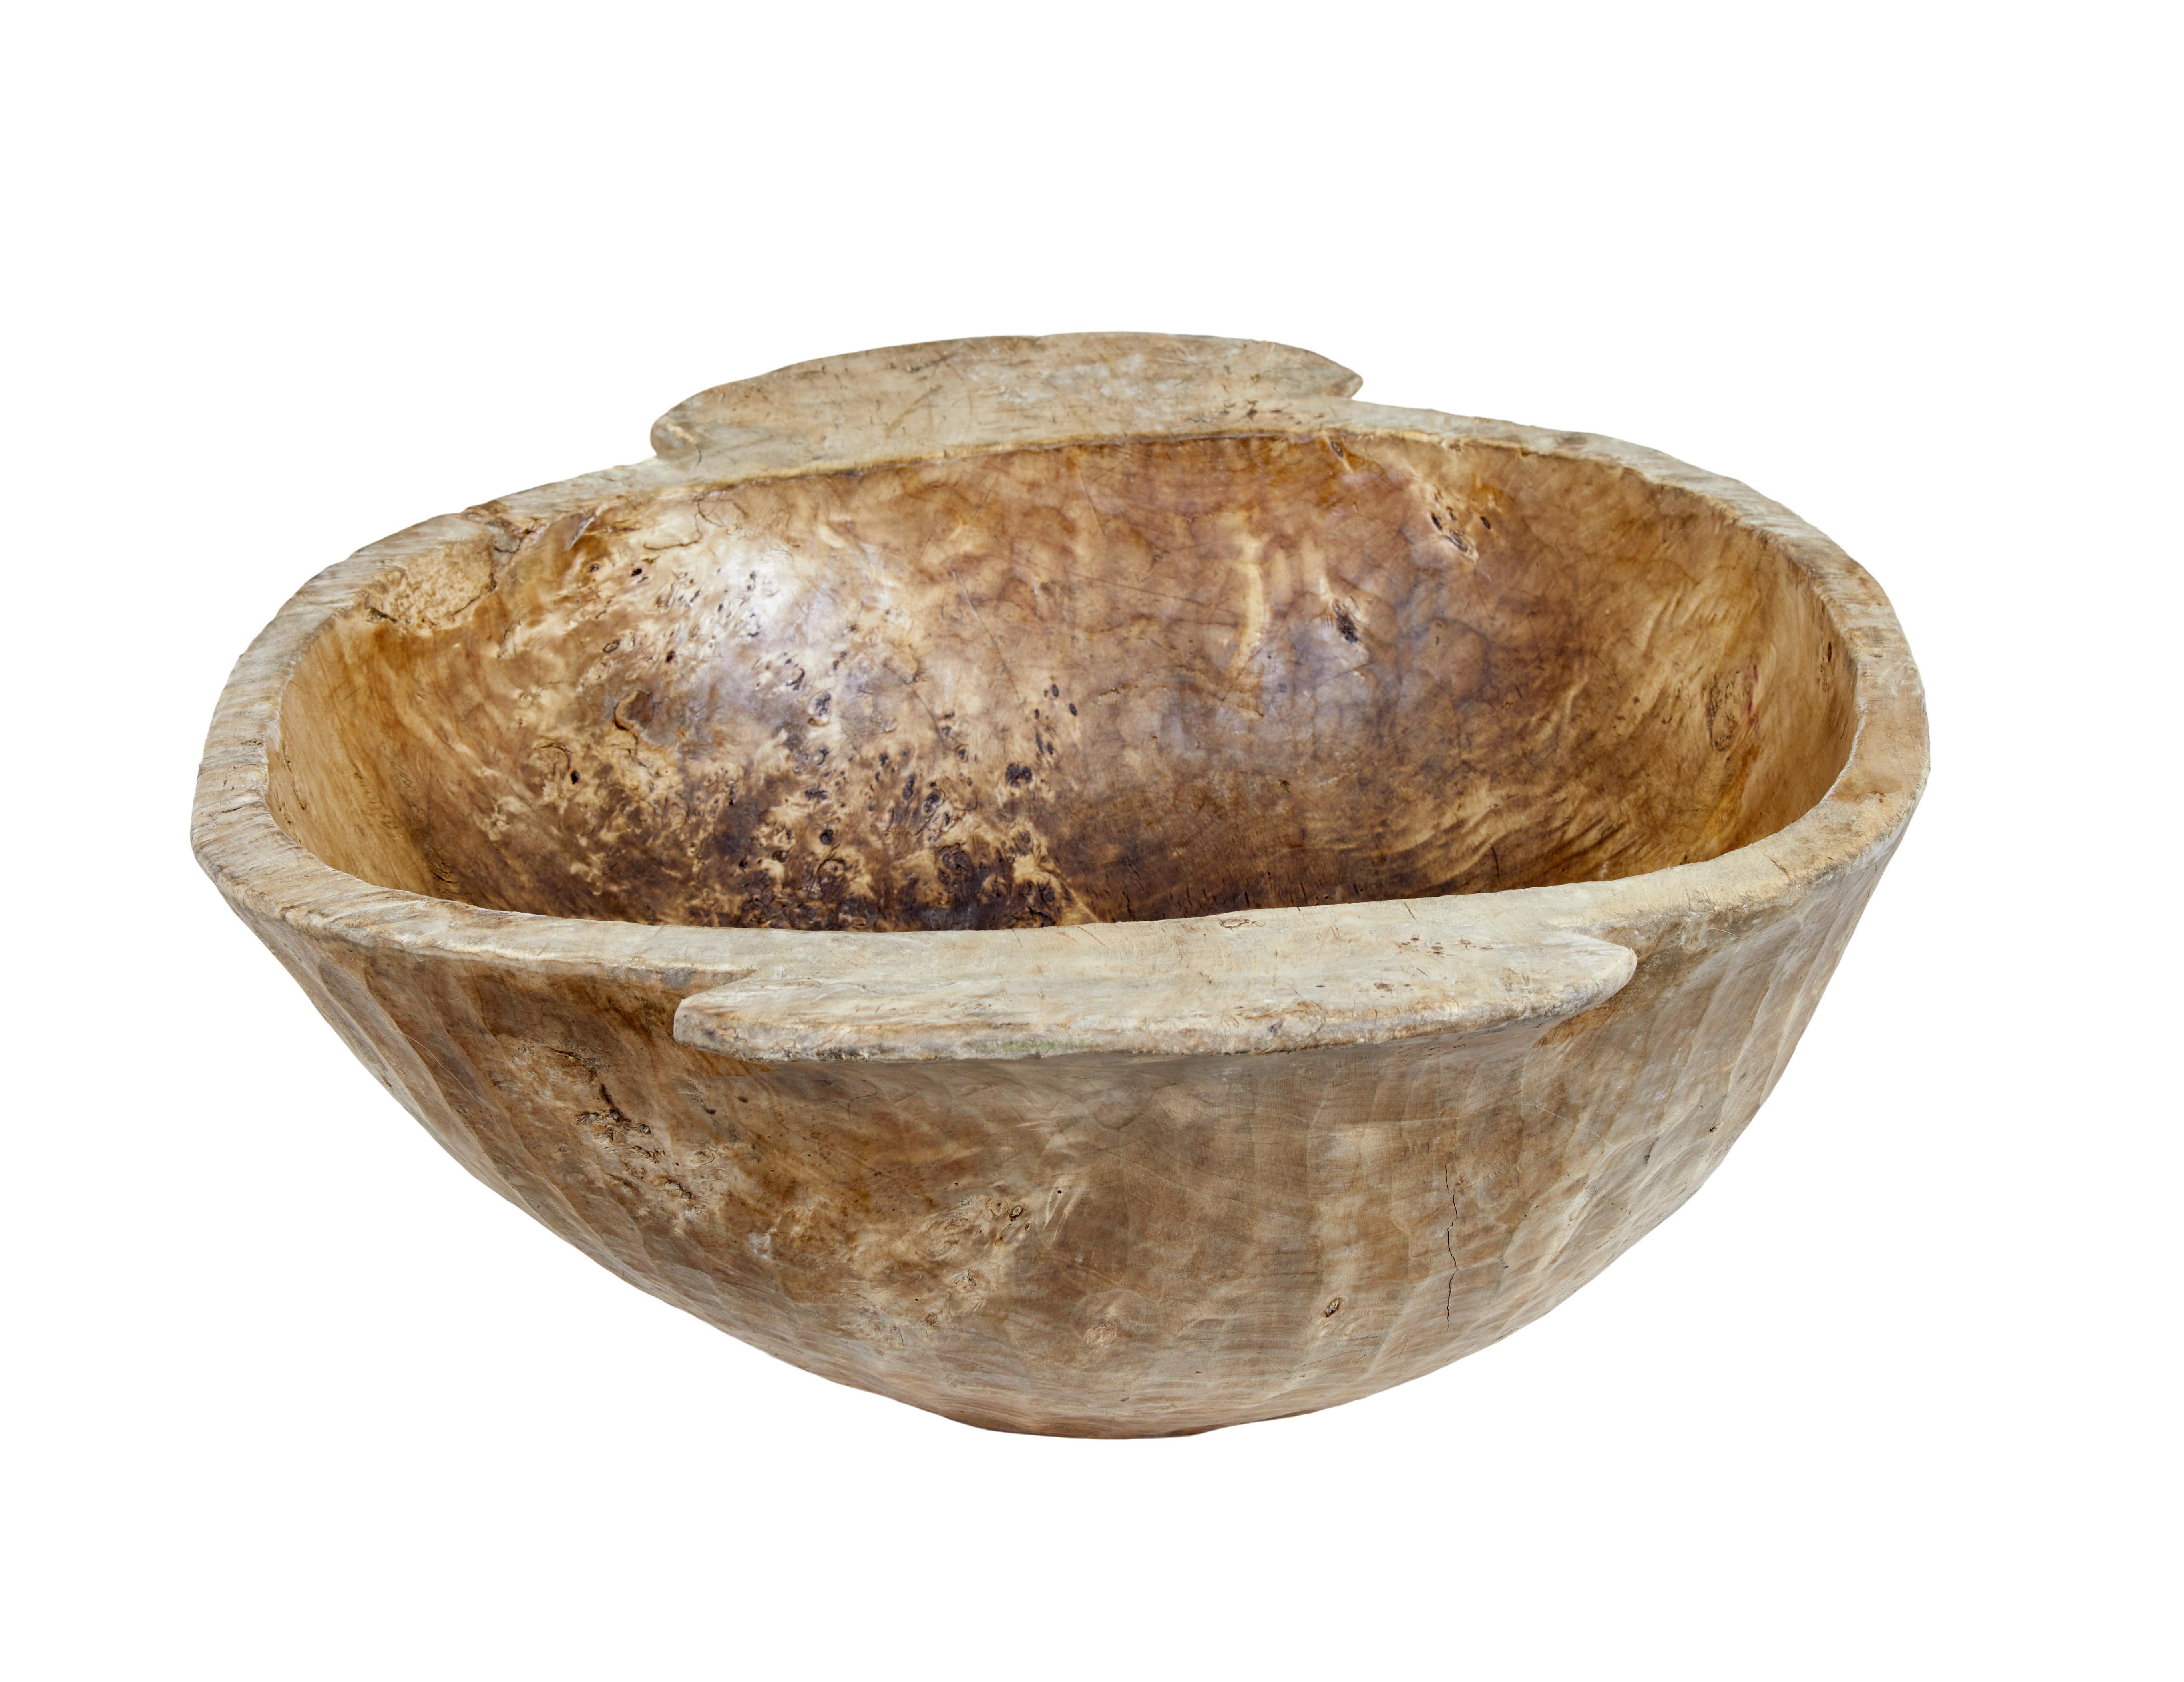 Early 20th century large wooden bowl circa 1900.

Here we offer a large wooden bowl which would have been used to feed livestock in eastern europe at the beginning of the 1900's. We have re-conditioned the bowl with a polished interior and a